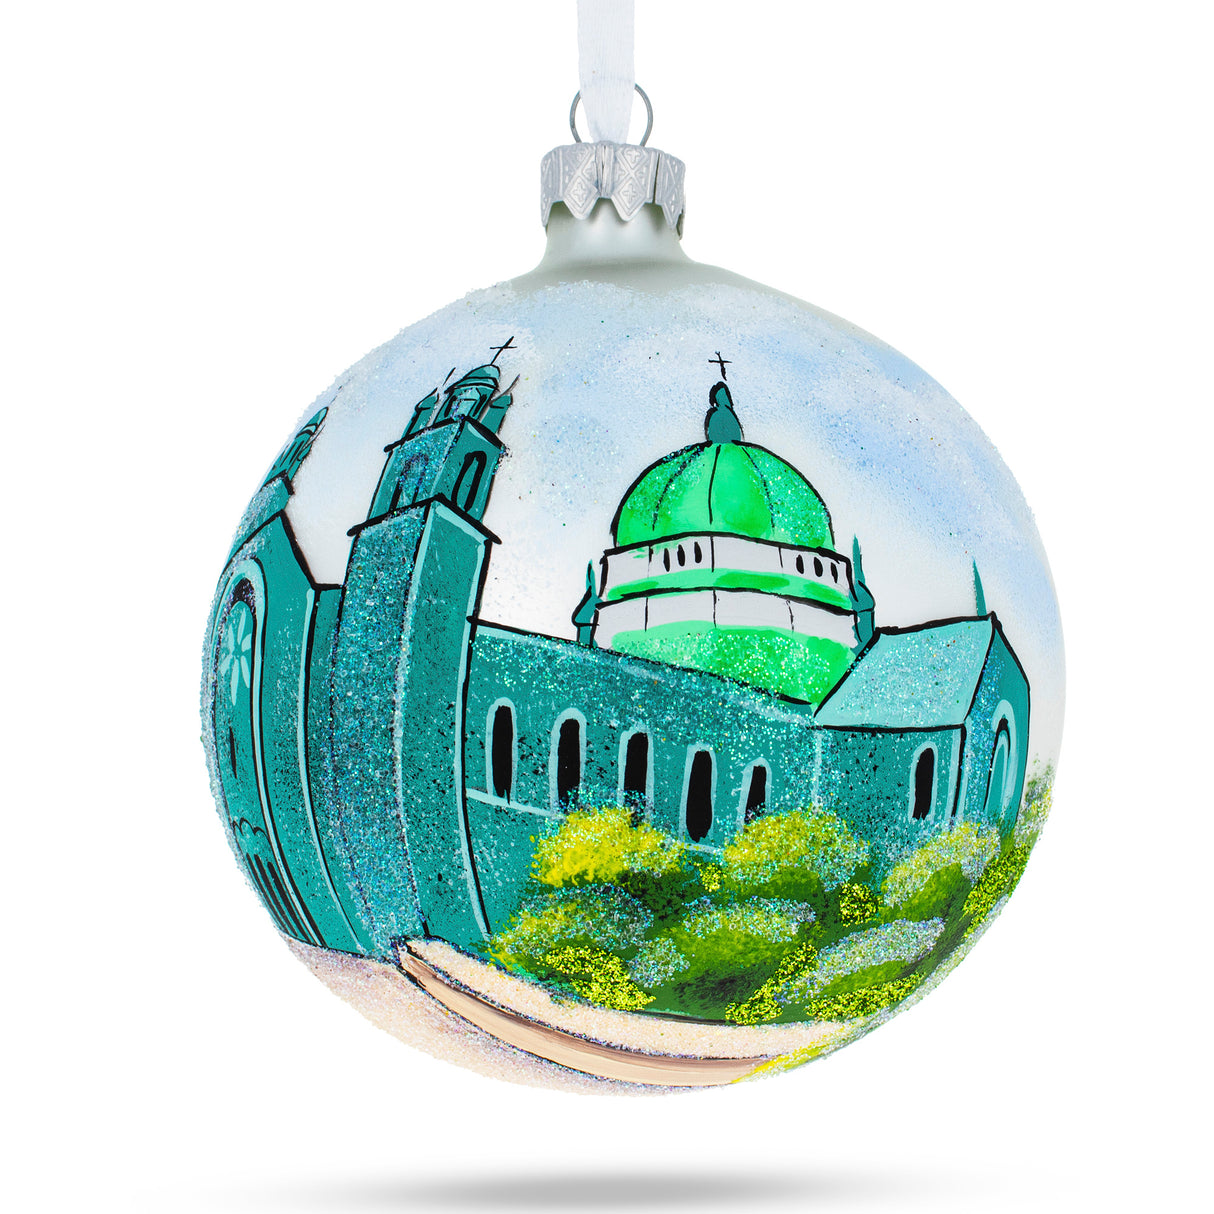 Galway Cathedral, Ireland Glass Ball Christmas Ornament 4 Inches in Green color, Round shape